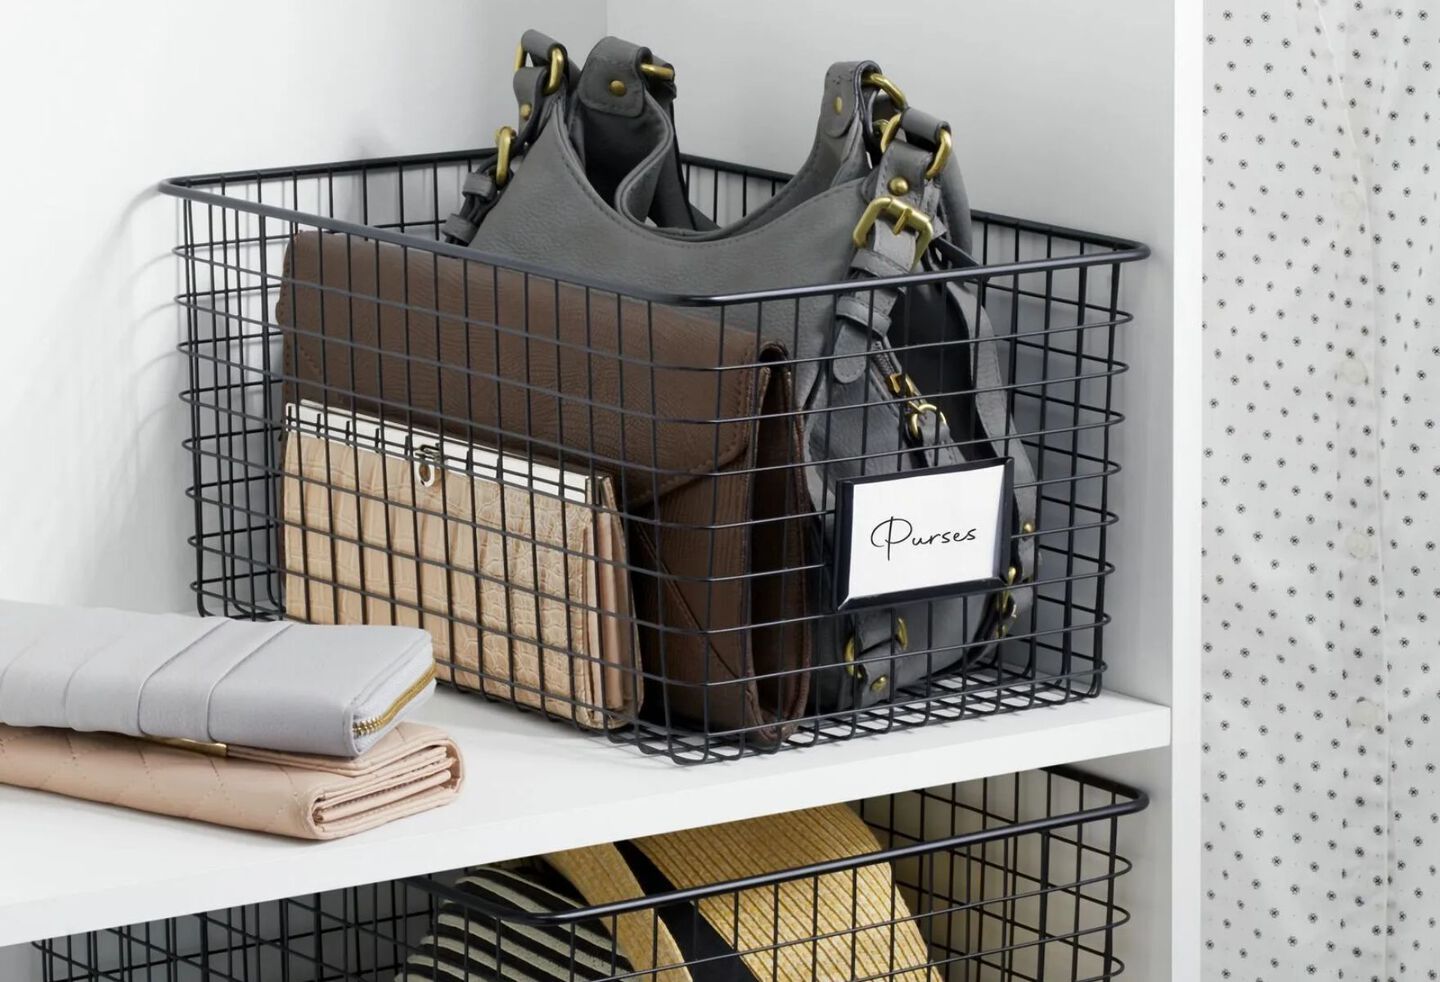 Closet shelf with black wire basket with purses and wallets inside